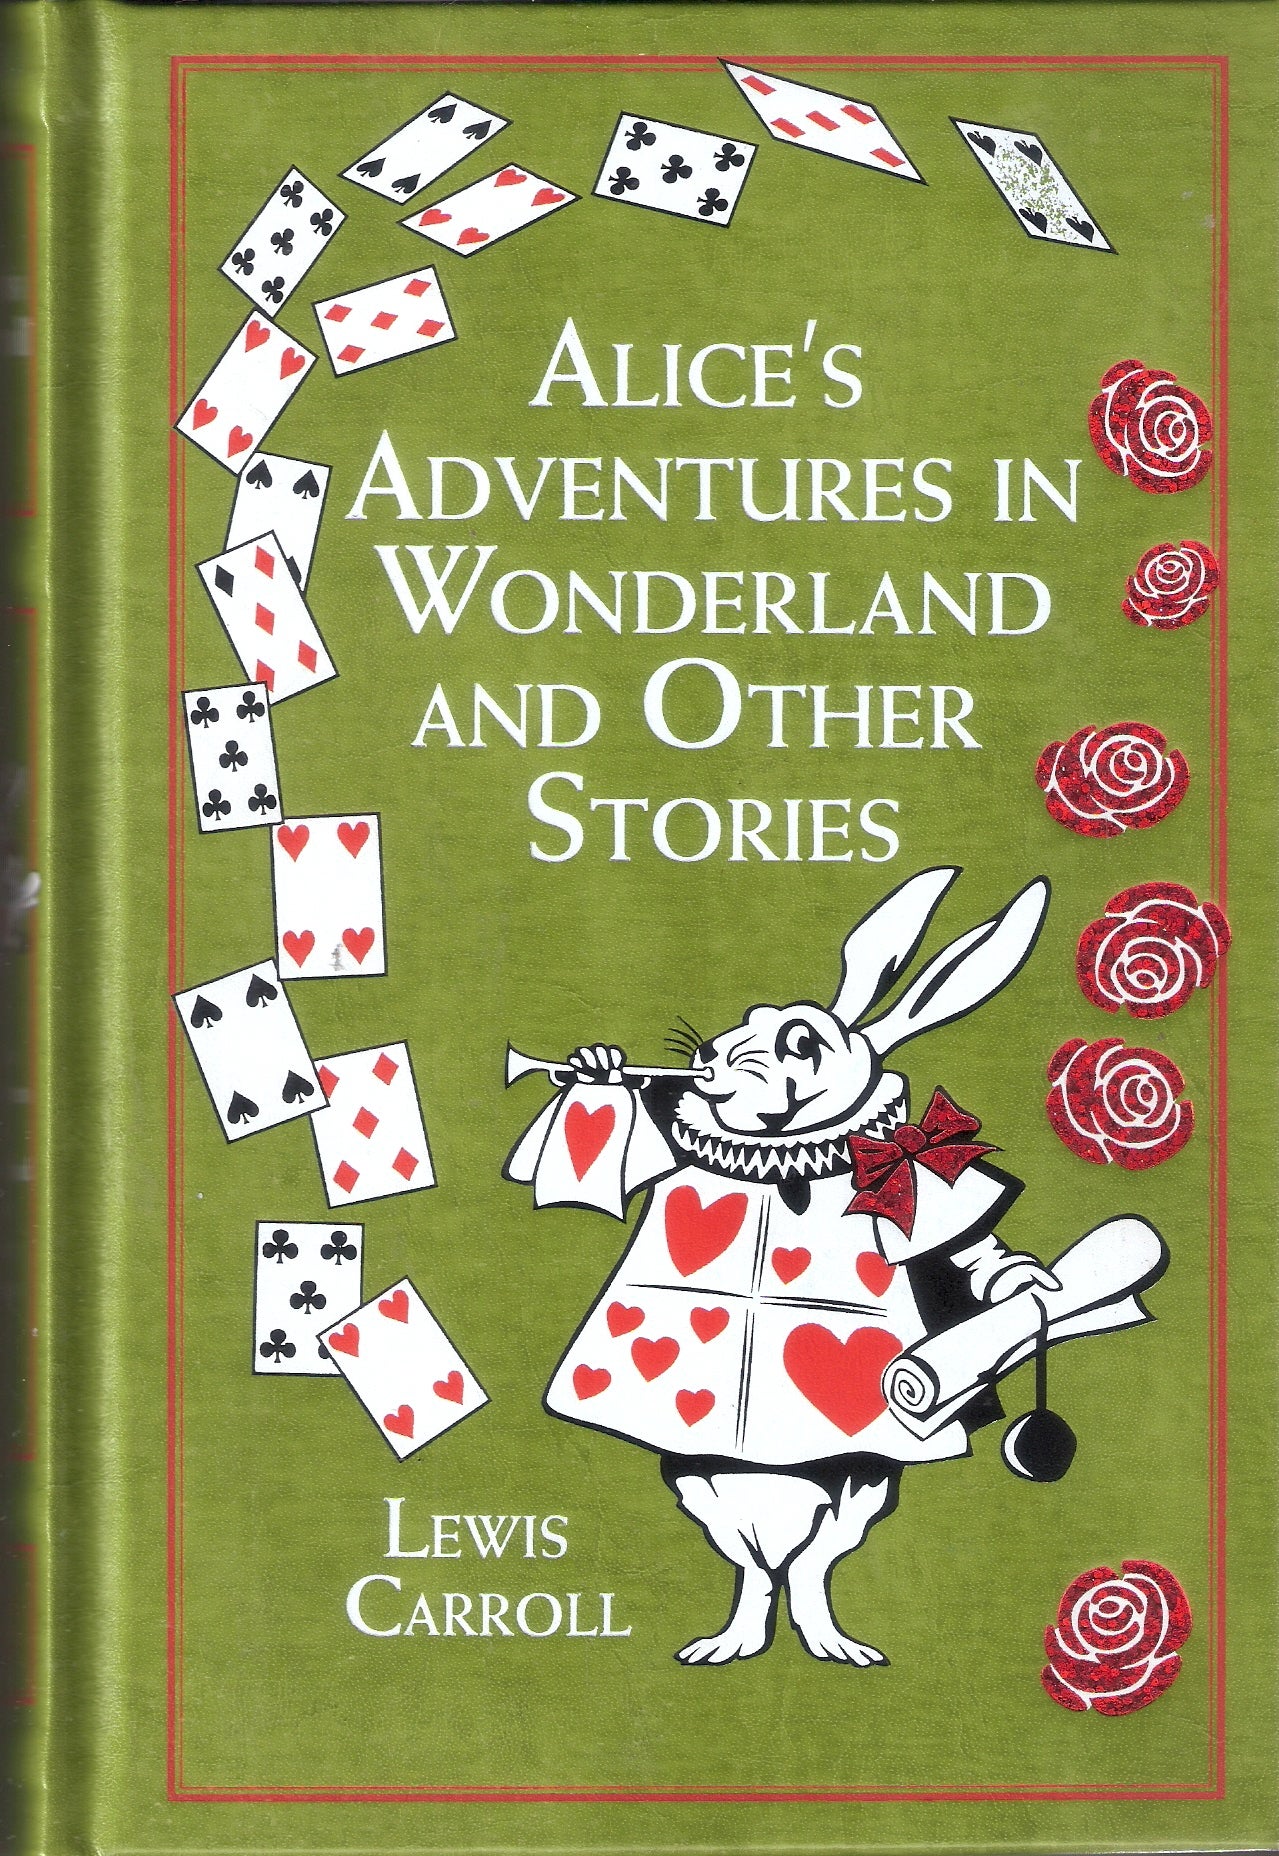 Carroll　and　1st　Lewis　Edition　Other　Stories　in　Adventures　Alice's　Wonderland